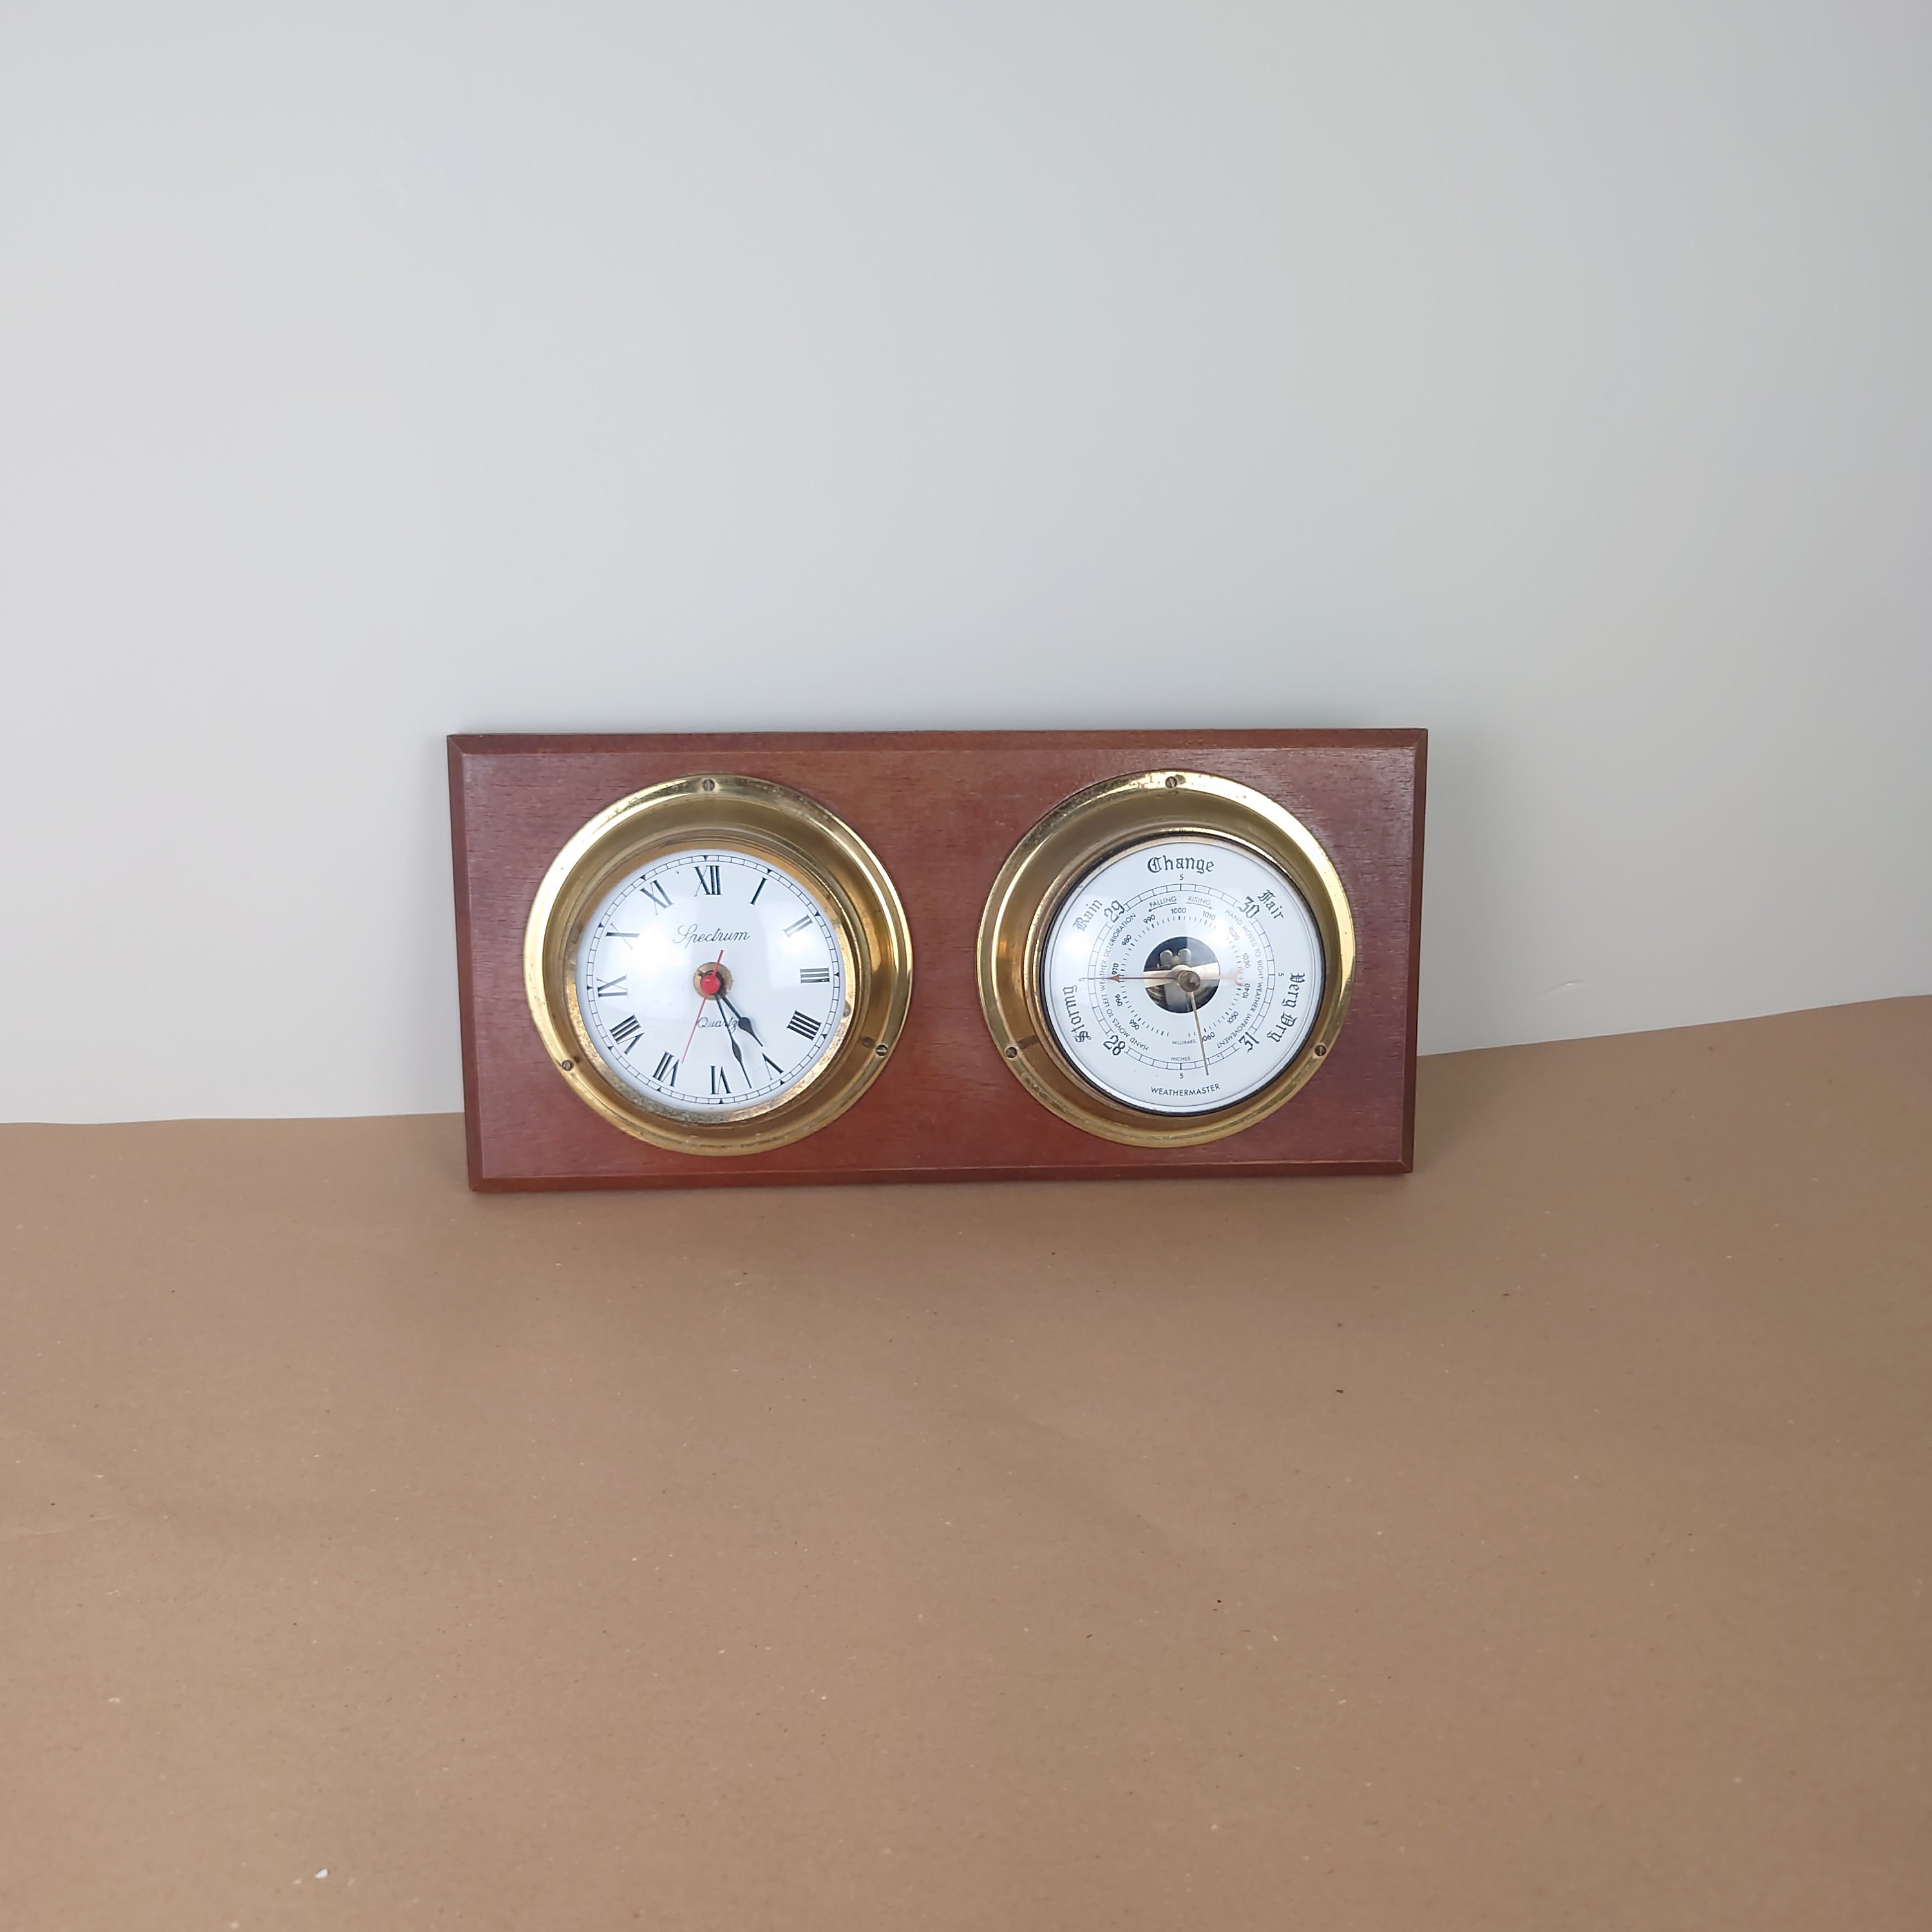 Outdoor Barometer Thermometer Hygrometer 5in Barometer Weather